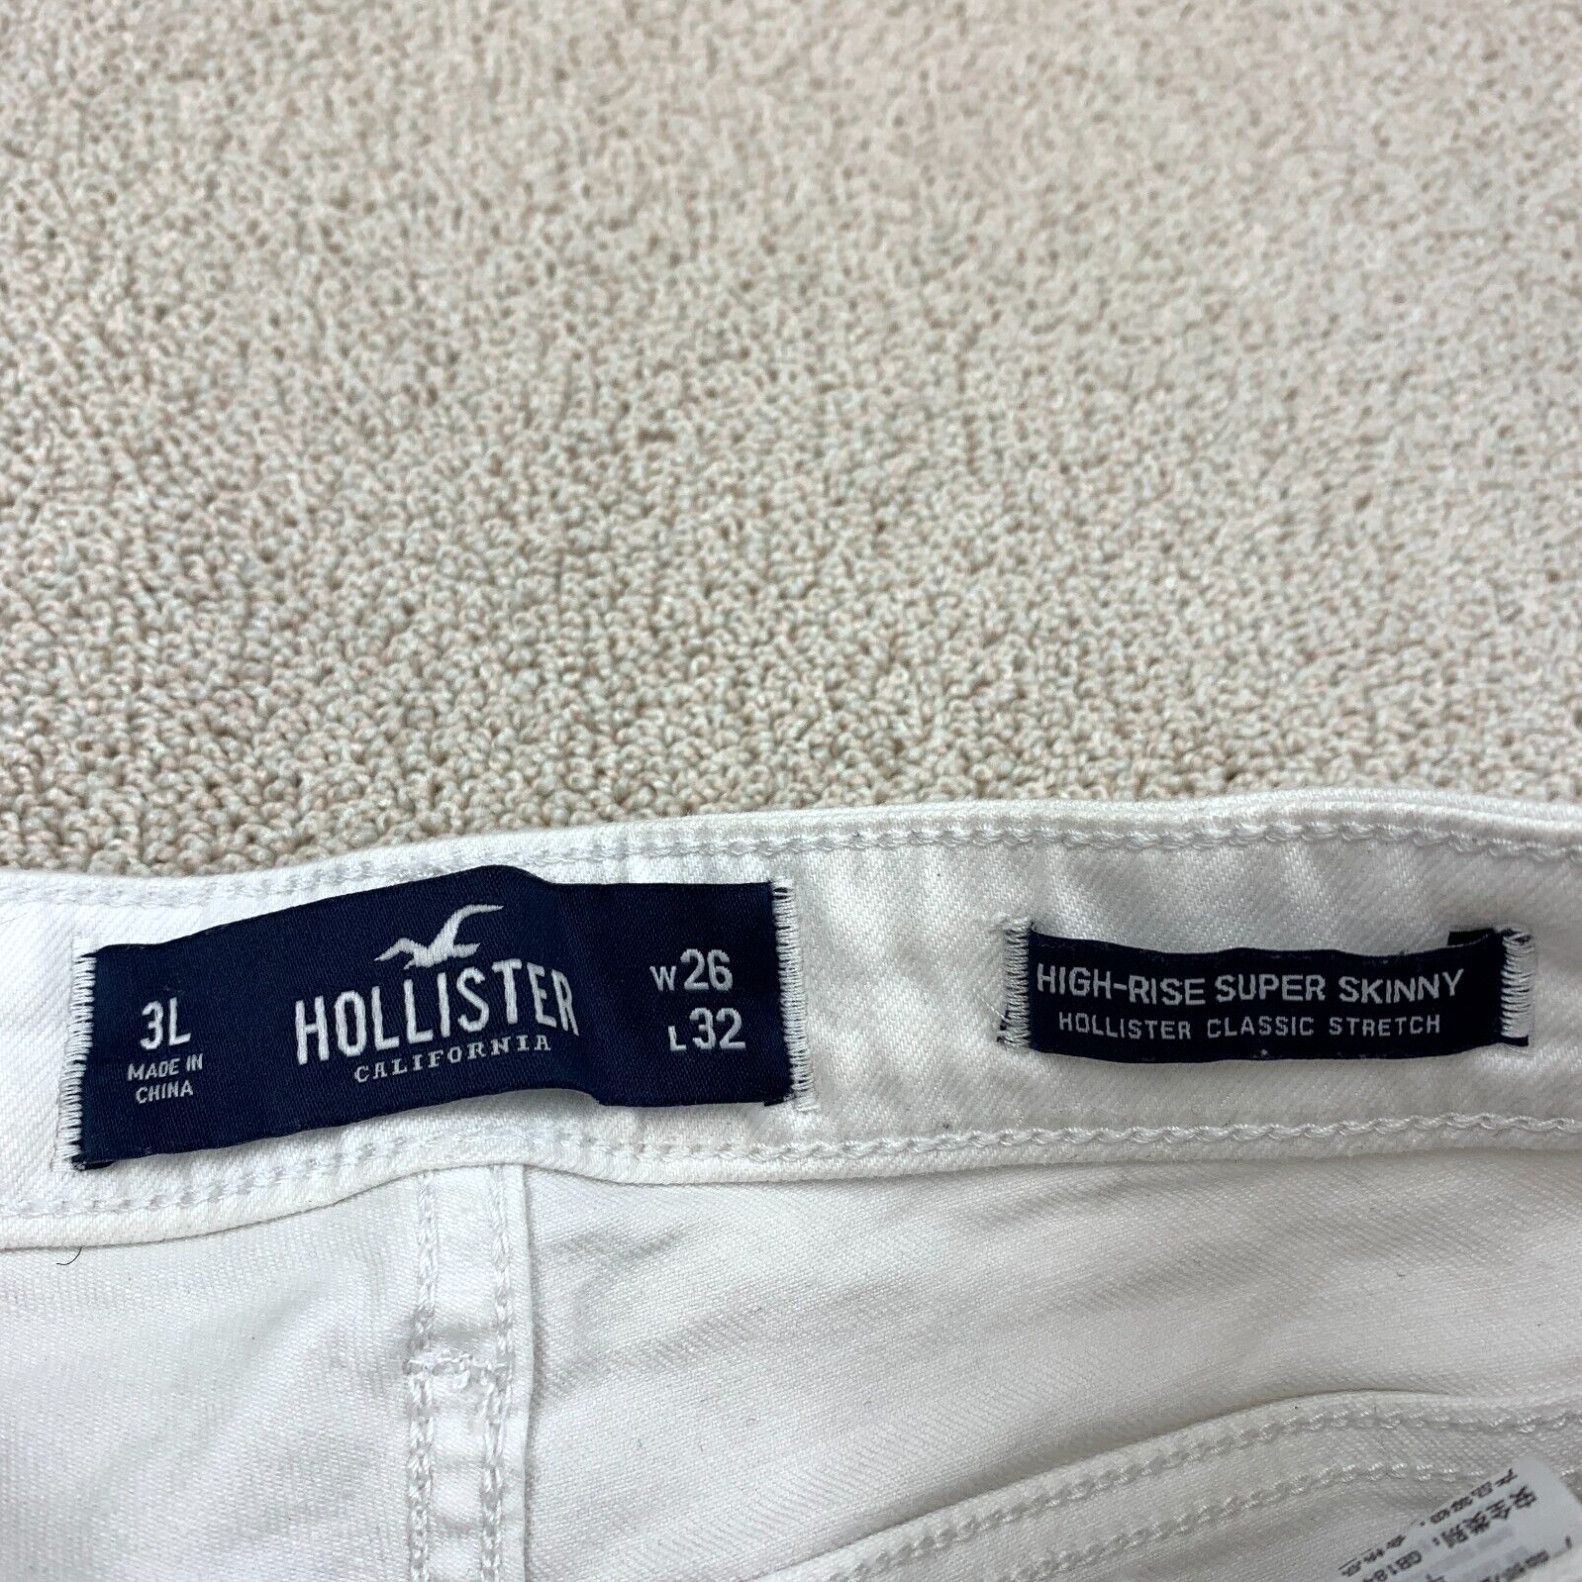 Vintage Hollister Classic Stretch High-Rise Super Skinny Jeans Juniors 3L 26x32 White Size ONE SIZE - 2 Preview